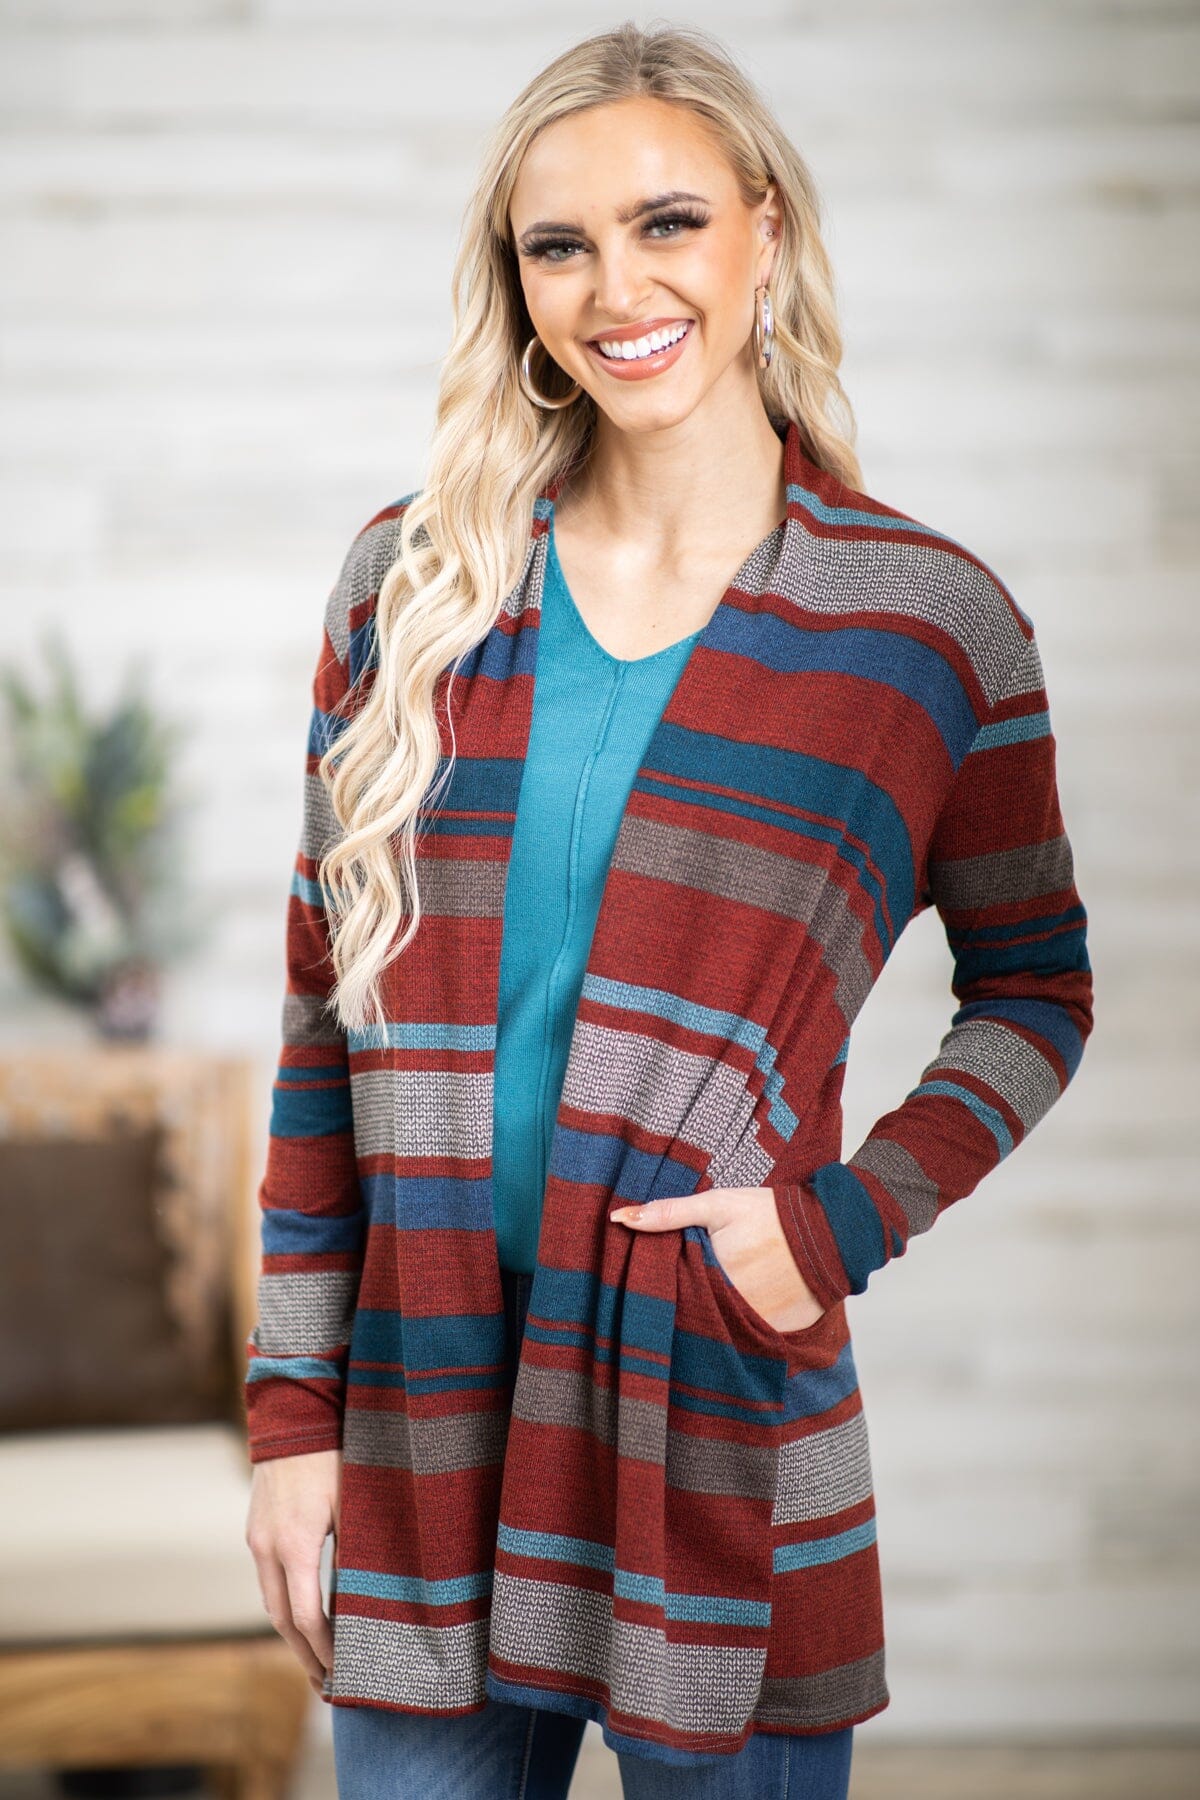 Cranberry and Blue Stripe Cardigan - Filly Flair